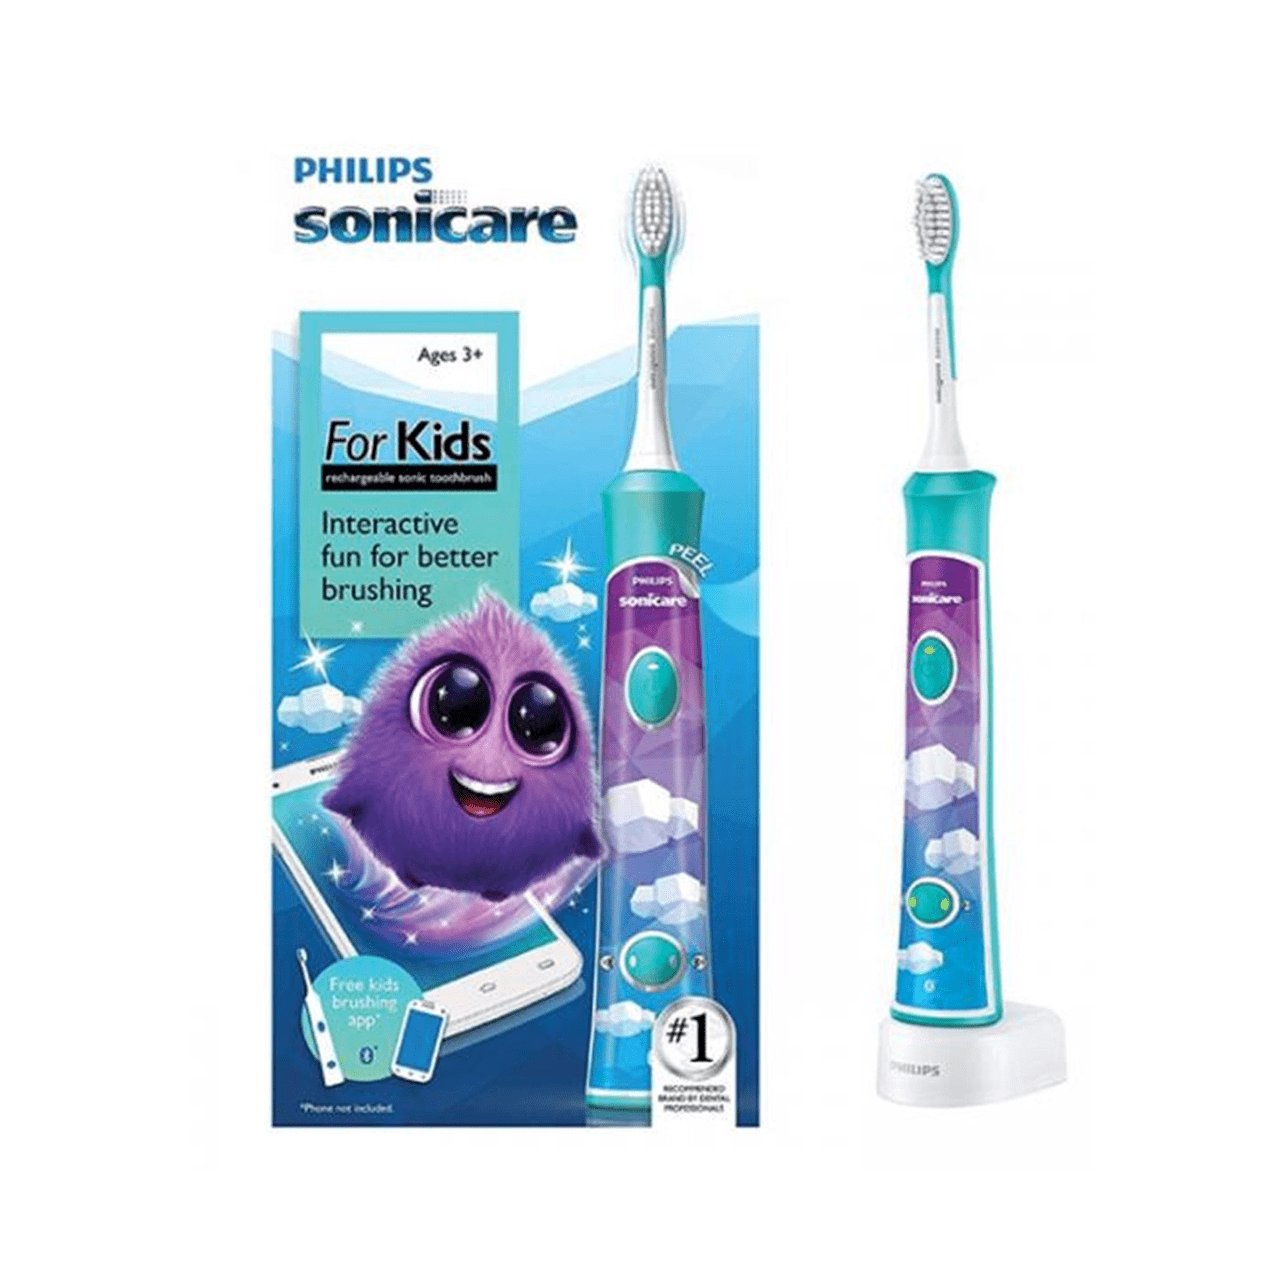 Philips Sonicare Electric Toothbrush For Kids